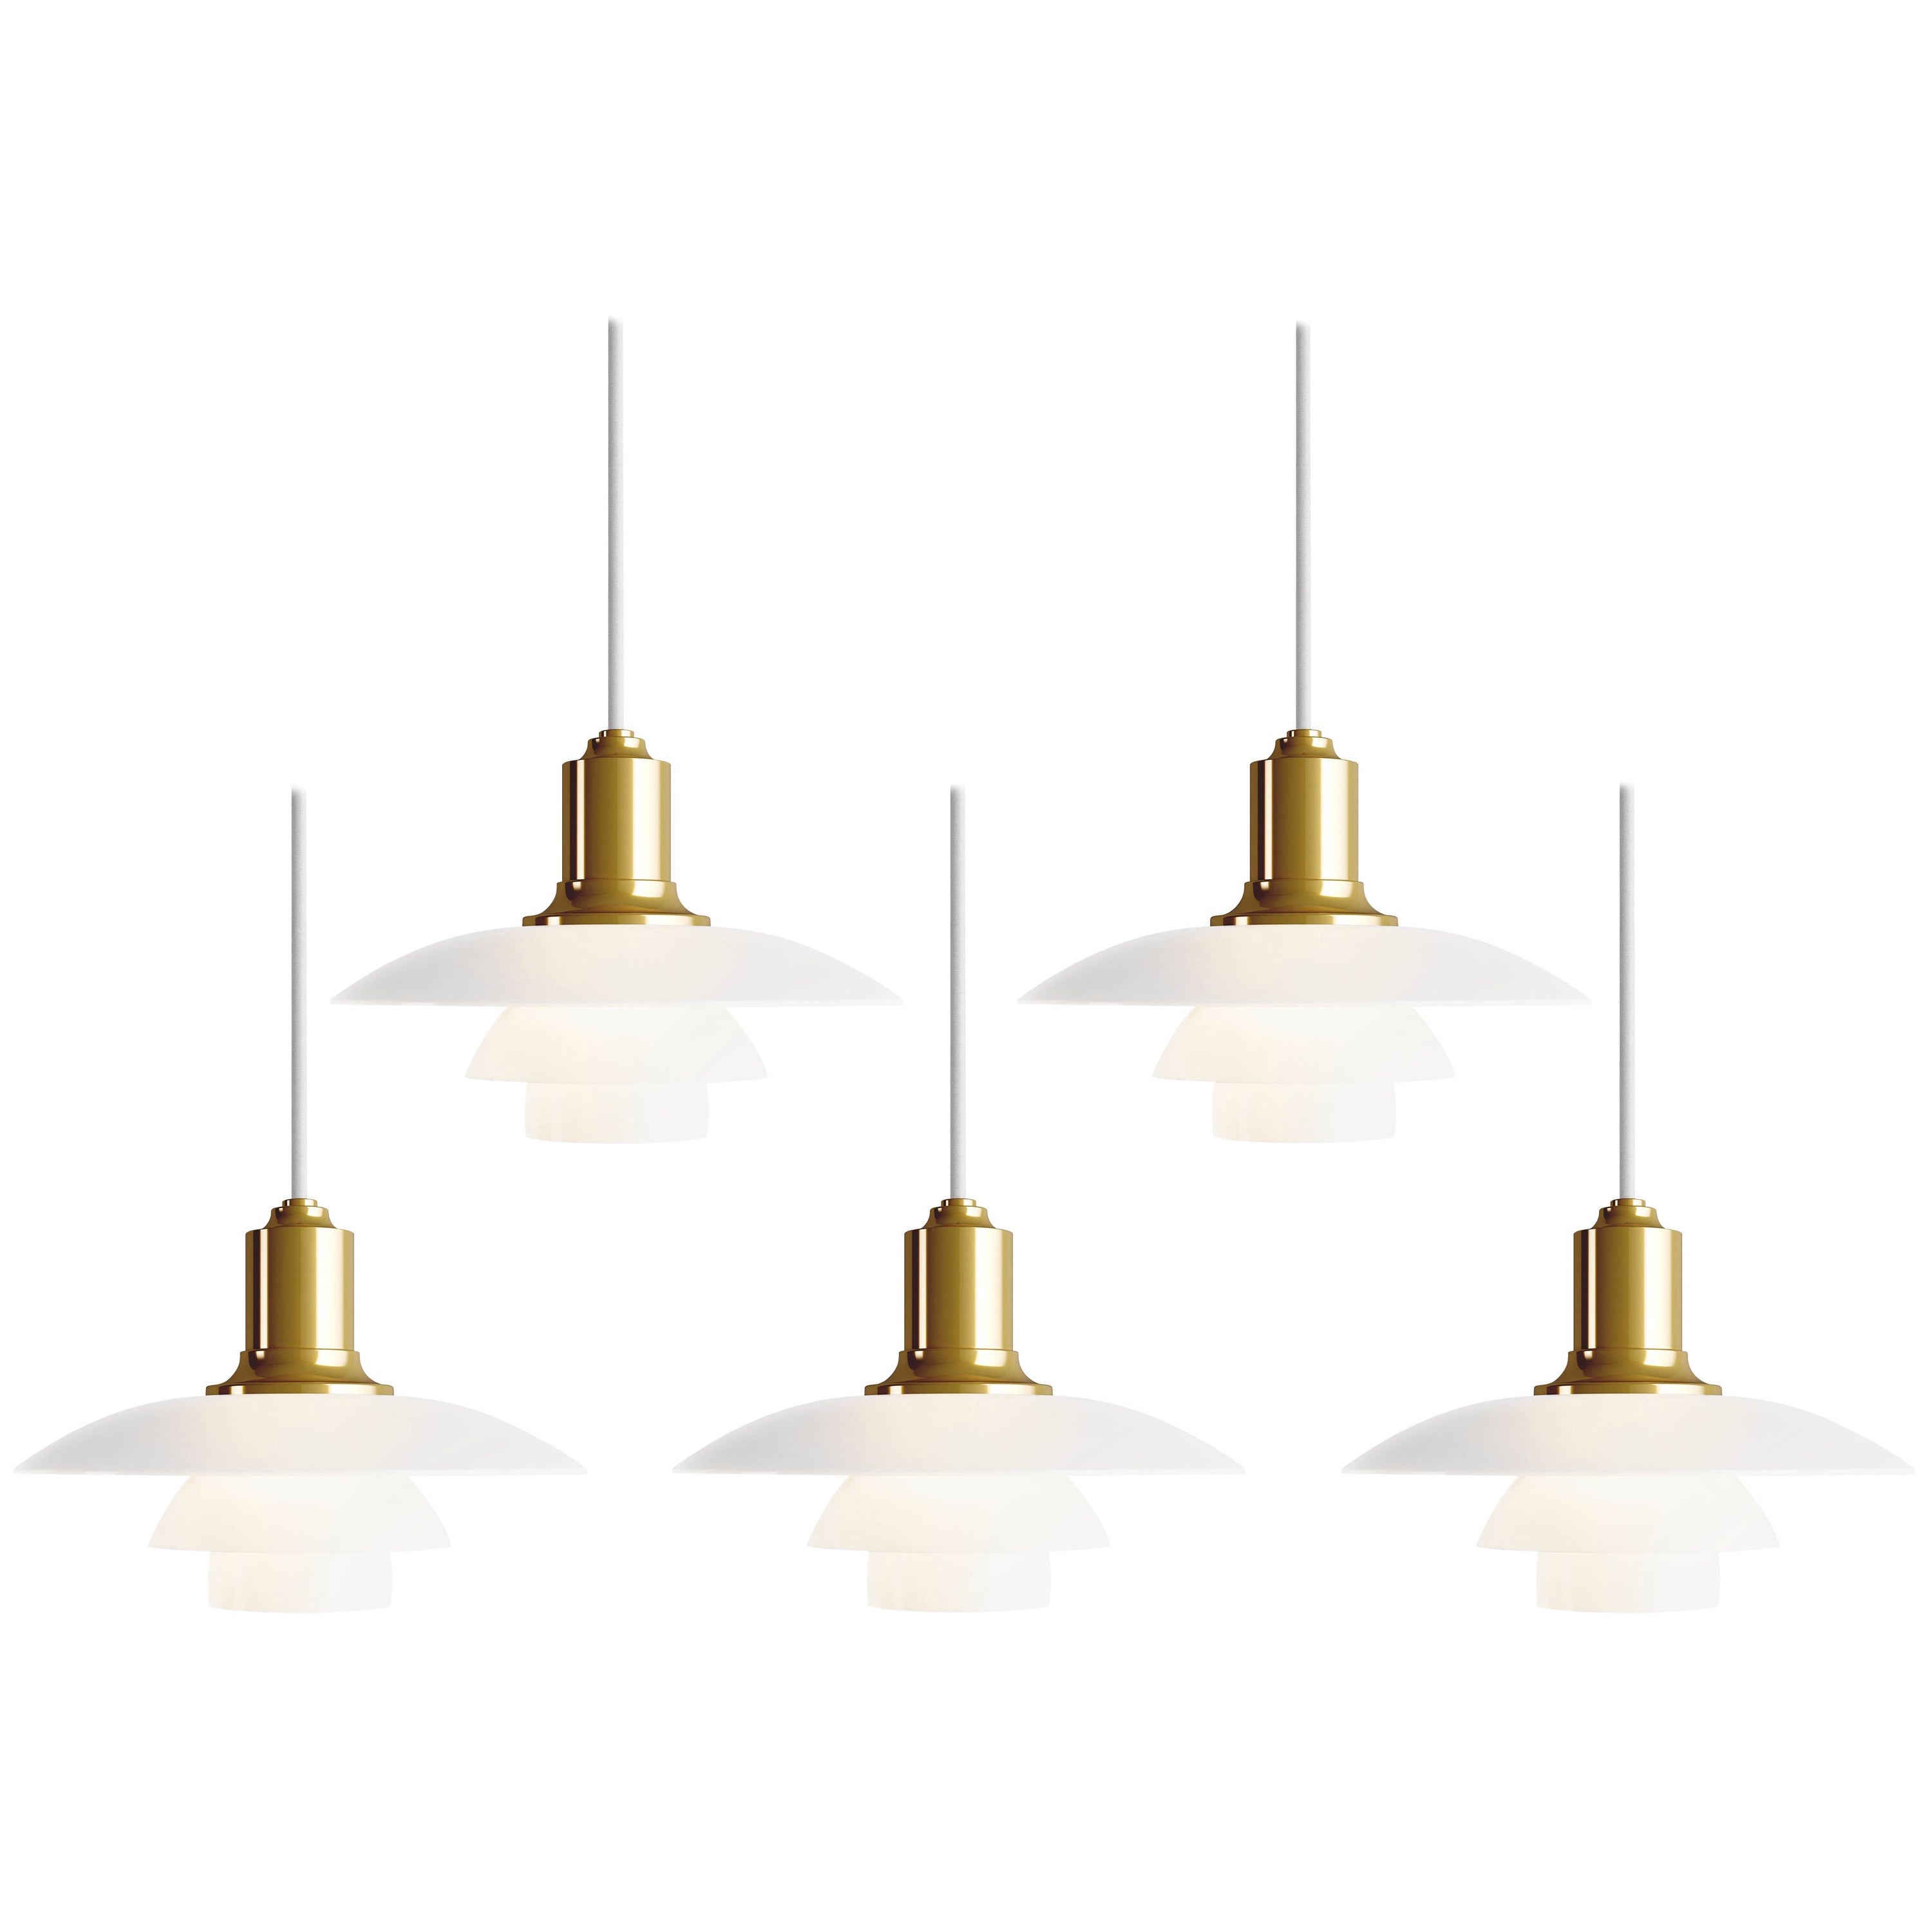 Poul Henningsen PH 2/1 brass and glass pendant for Louis Poulsen. 

Executed in white opal glass and a brass, chrome or black metallized frame. The Industrial look of the dark metalized surface offers a bold, understated look. The mouth-blown white